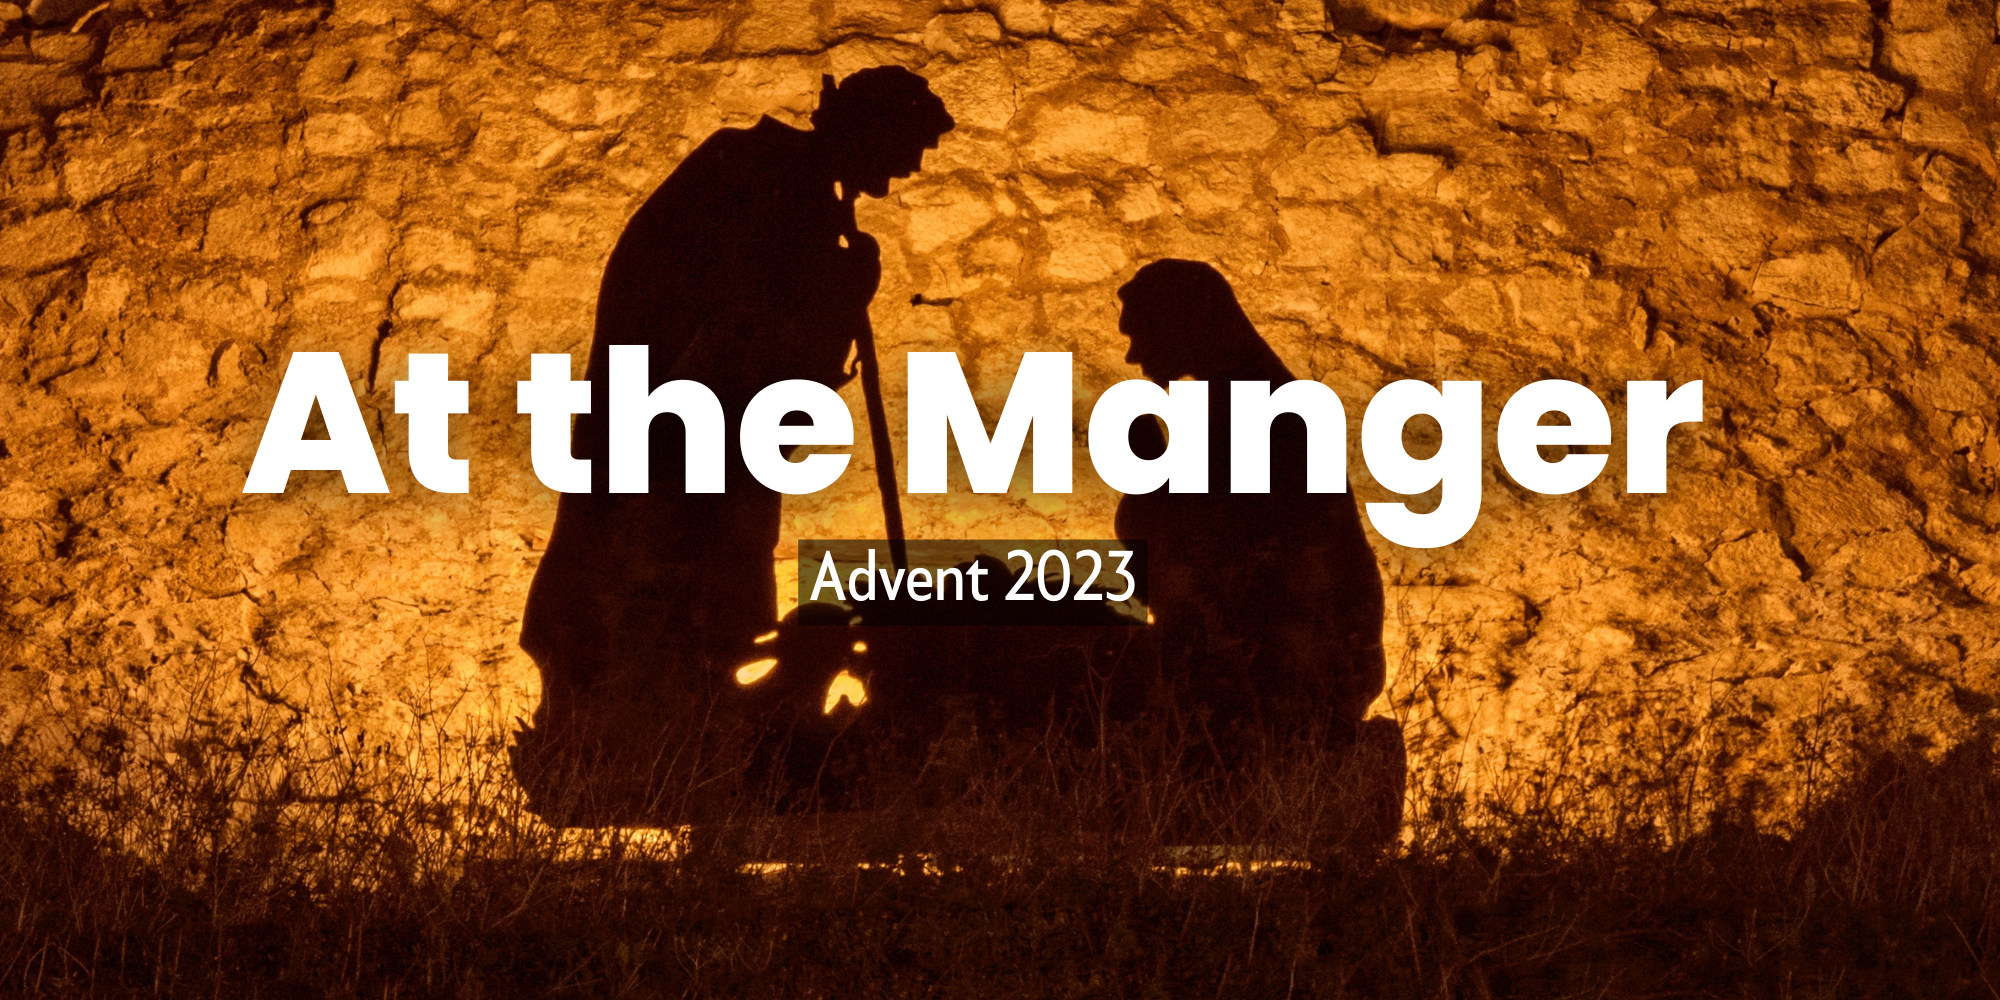 At The Manger: The Shepherds